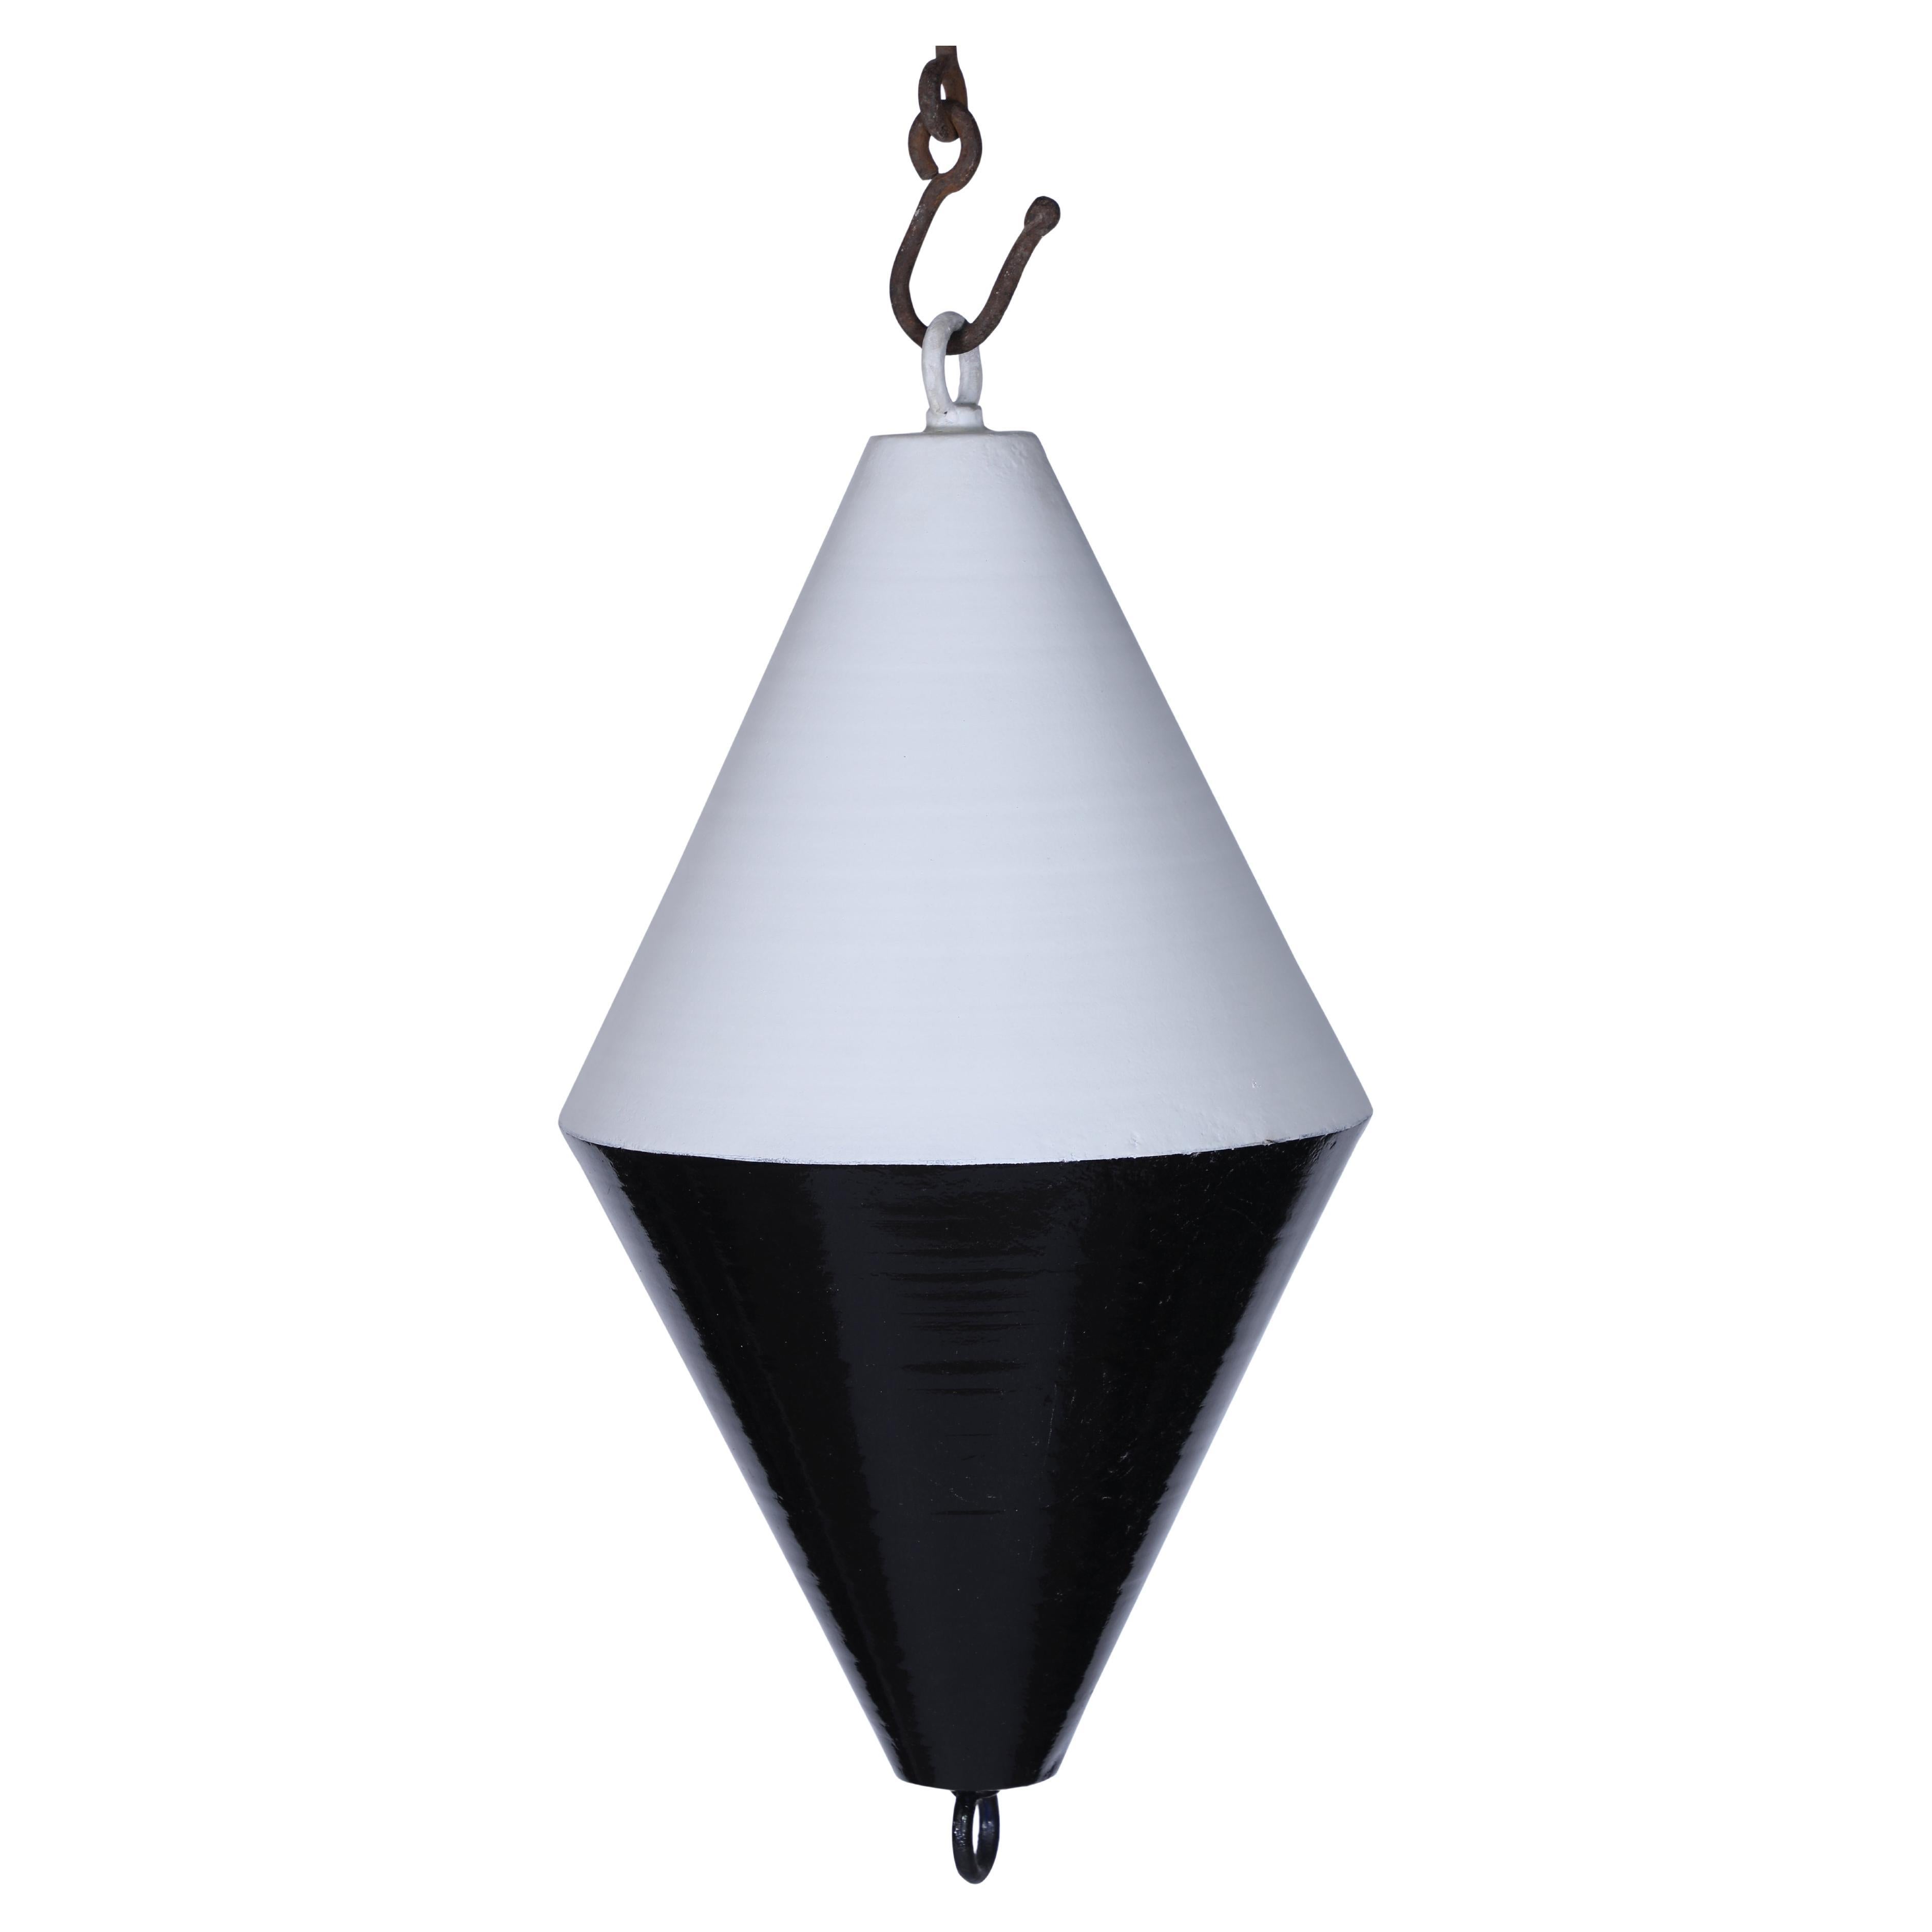 A ship's metal day shape signal buoy from the 1970's.  This is a diamond shape with one end black and the other white.  As most signal buoys are black, perhaps this indicates a cone shape which when mounted aloft the ship would indicate under sail